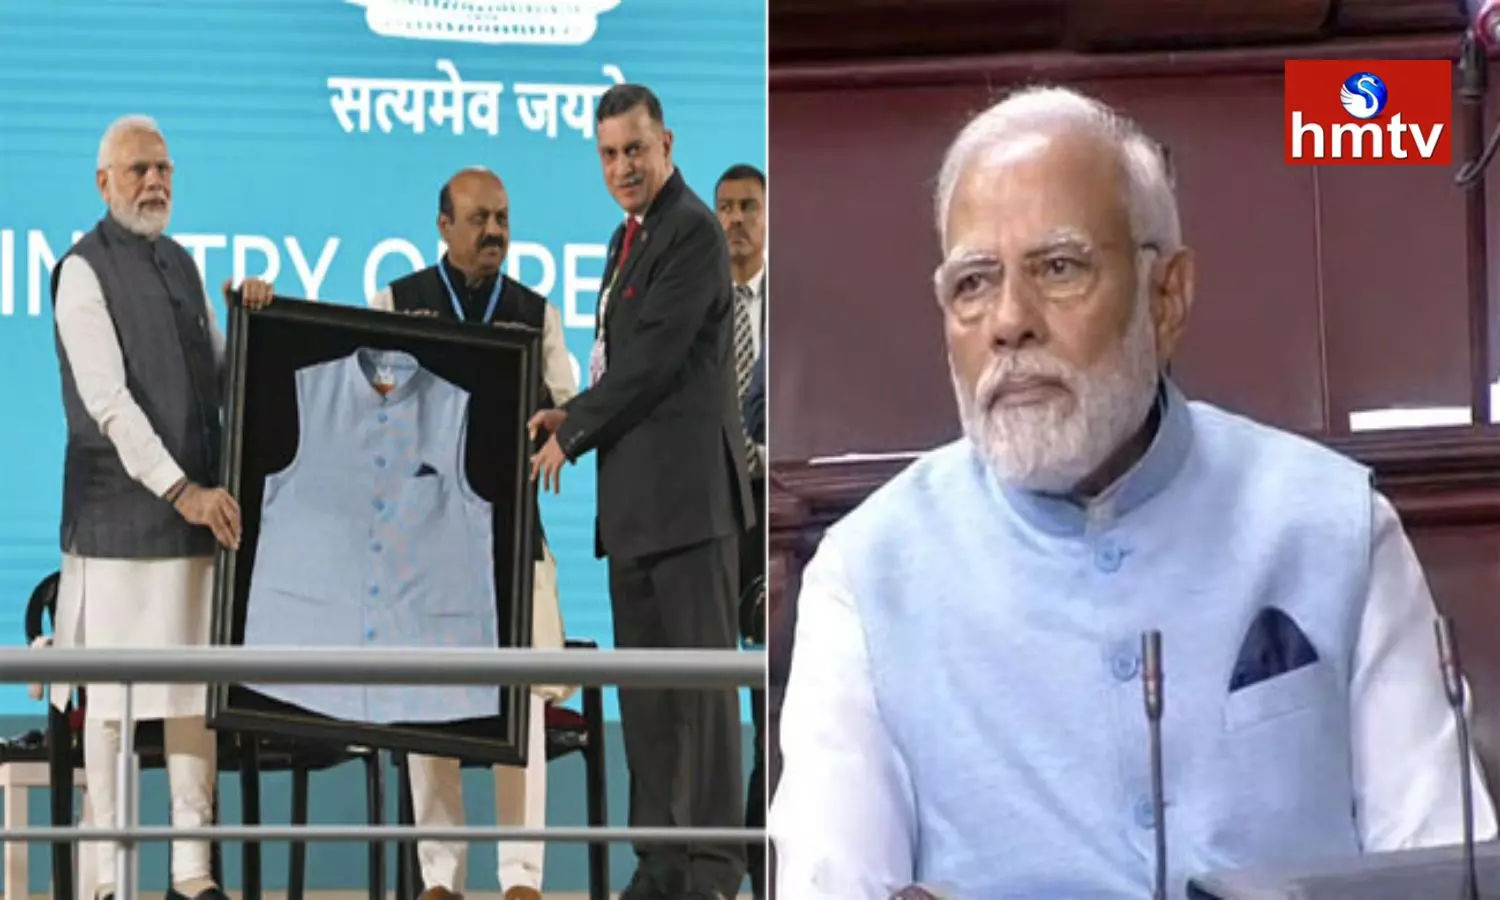 PM Modi Wears Jacket Made of Material Recycled From Plastic Bottles